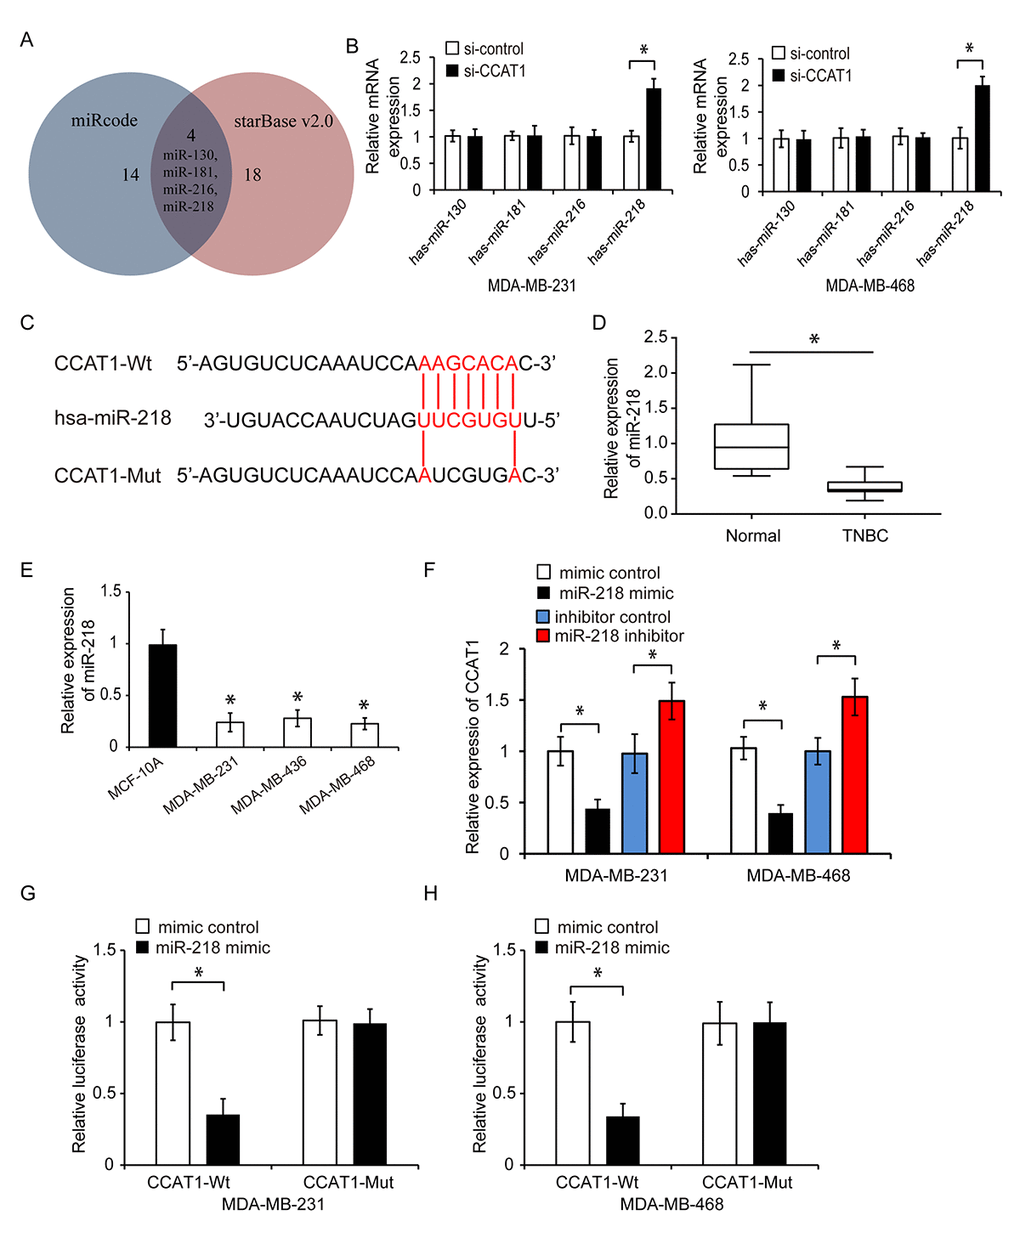 CCAT1 functions as a sponge for miR-218. (A) MiRcode and starBase were used to predict the miRNAs that could bind to CCAT1. Four miRNAs were identified: miR-130, miR-181, miR-216 and miR-218. (B) Relative expression of these four miRNAs in TNBC cells following transfection with si-CCAT1 or si-control. (C) Diagram showing the predicted miR-218 binding site in the CCAT1 sequence and the nucleotides that were mutated to impair binding. (D) Analysis of miR-218 expression in human TNBC and adjacent normal tissue by qRT-PCR. (E) Analysis of the relative expression of miR-218 in three TNBC cell lines (MDA-MB-231, MDA-MB-436, and MDA-MB-468) and in a human normal breast epithelial cell line (MCF-10A) by qRT-PCR. (F) Relative expression of CCAT1 after transfection of TNBC cells with either a miRNA mimic control, miR-218 mimic, inhibitor control, or miR-218 inhibitor. (G, H) Luciferase reporter assays demonstrating that overexpression of miR-218 repressed the luciferase activity in MDA-MB-231 and MDA-MB-468 cells transfected with CCAT1-Wt. *P 